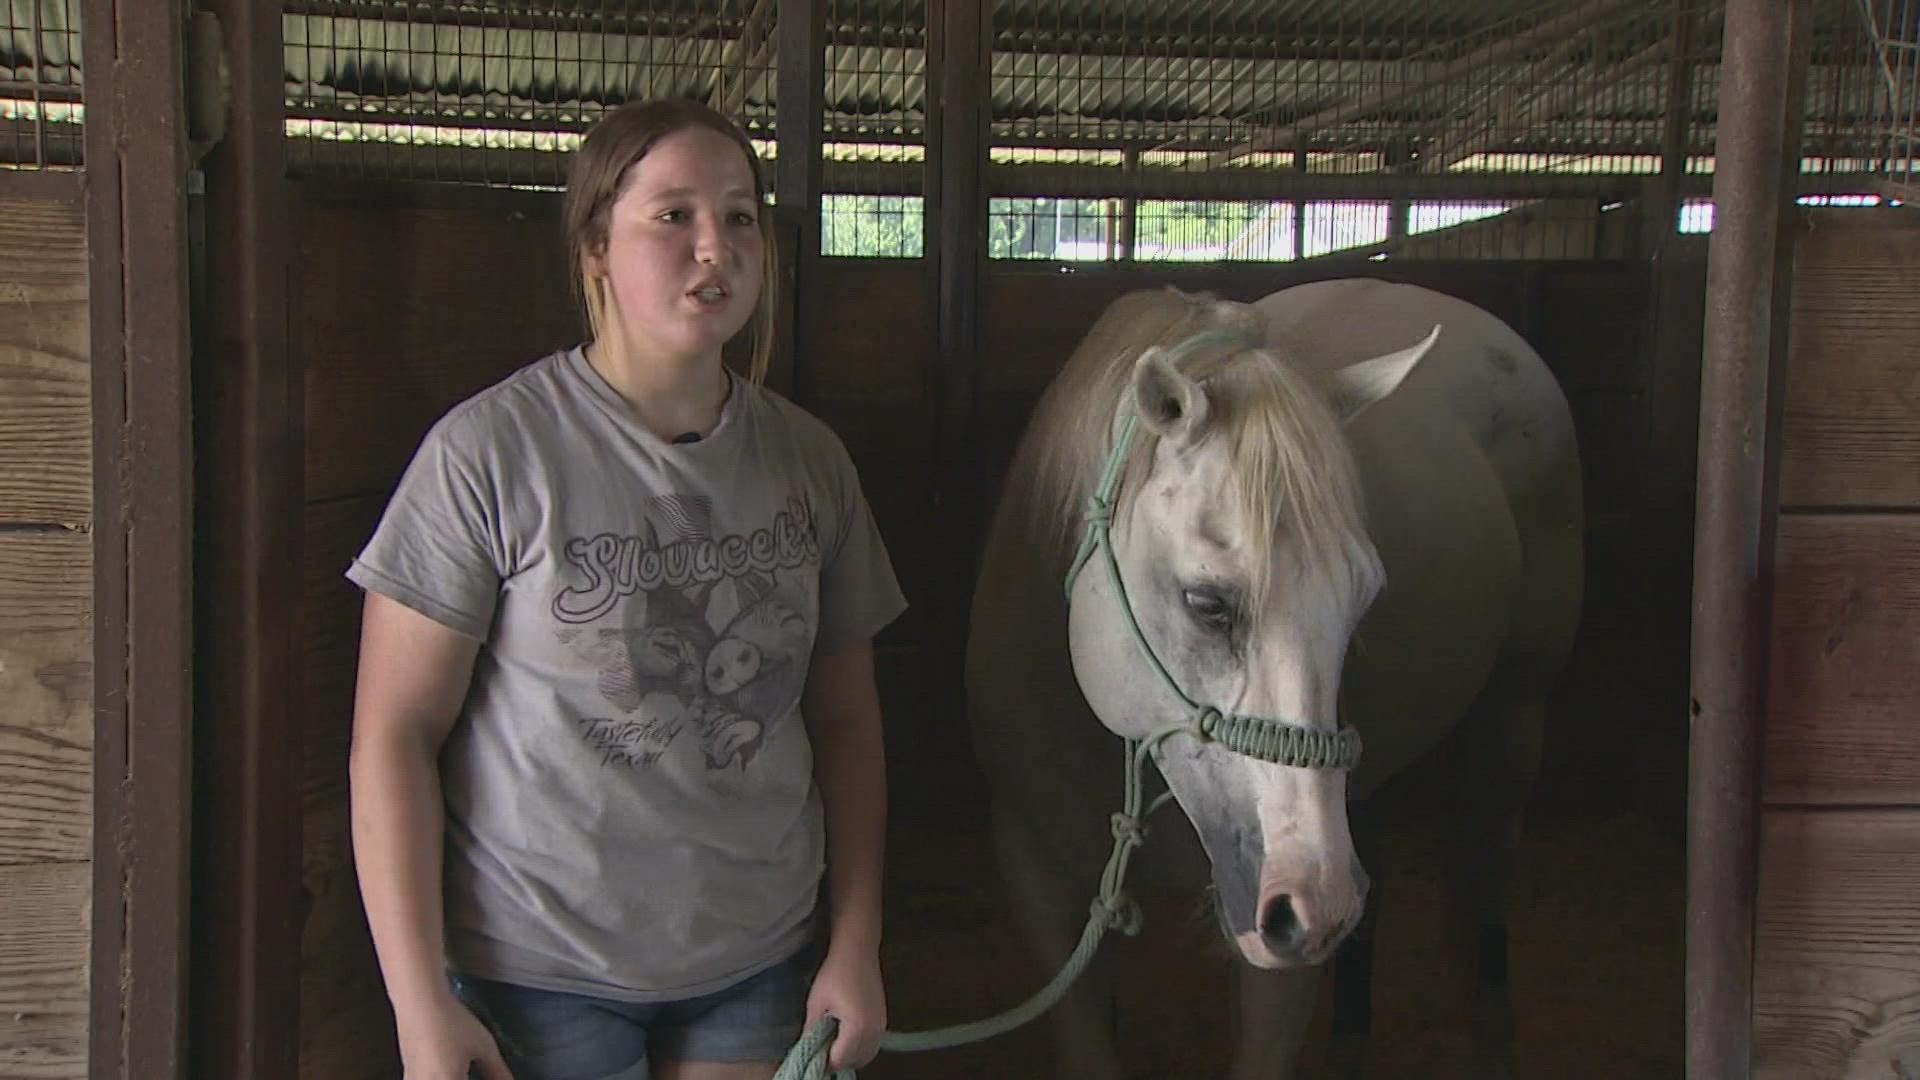 The barrel racing contest is the biggest task the 14-year-old has ever taken on, past her campaign to speak up for young people who suffer from bullying.